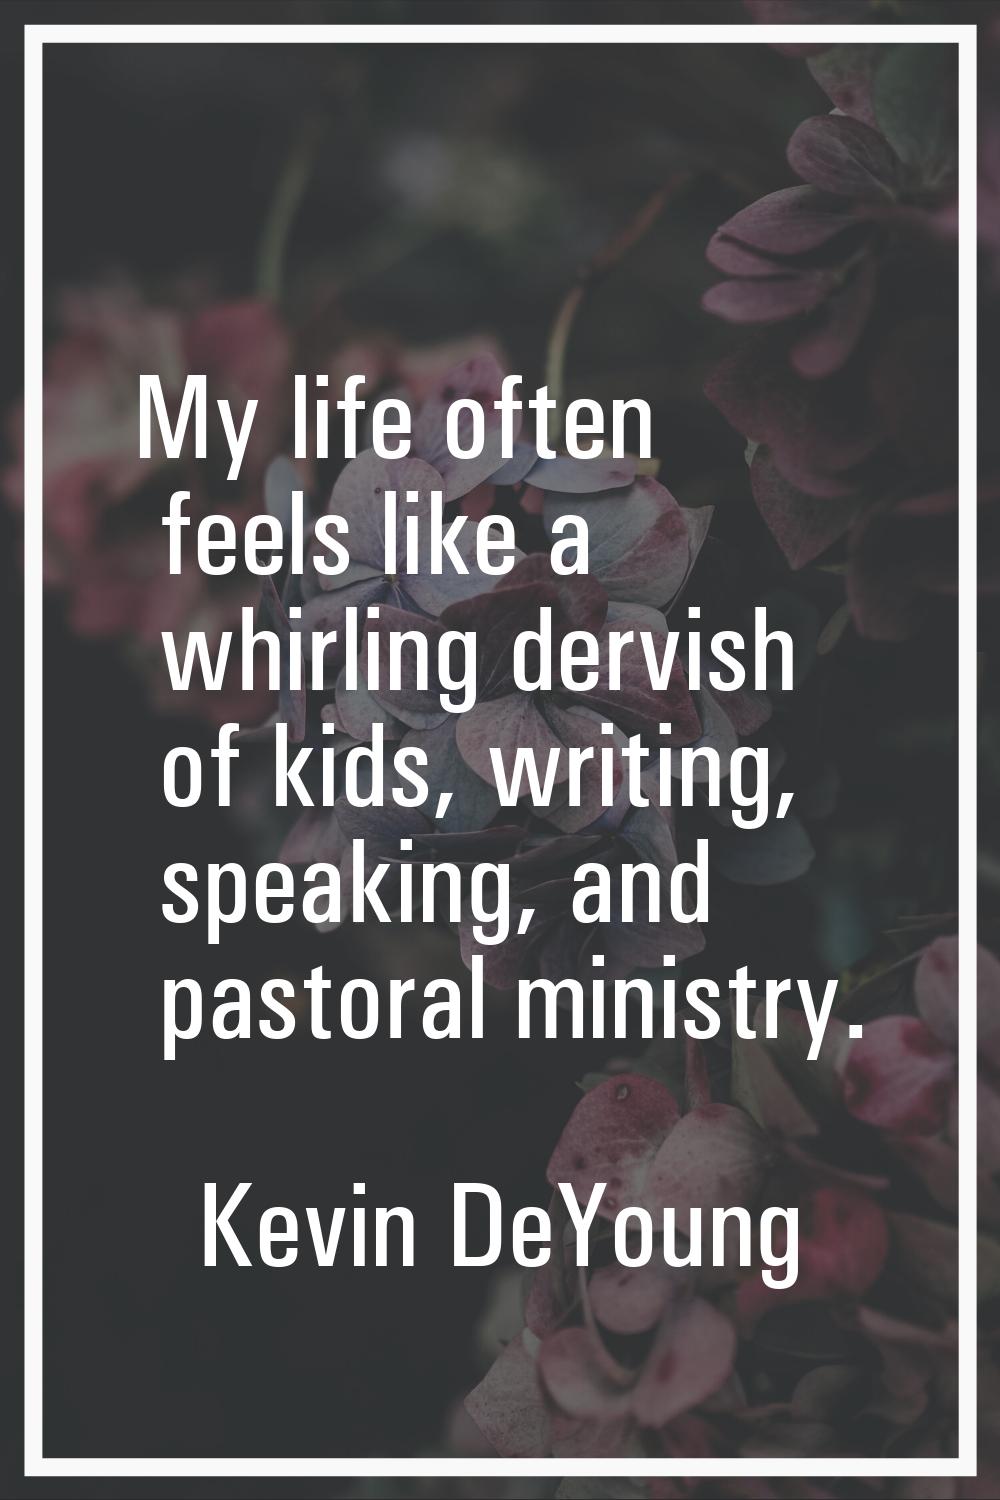 My life often feels like a whirling dervish of kids, writing, speaking, and pastoral ministry.